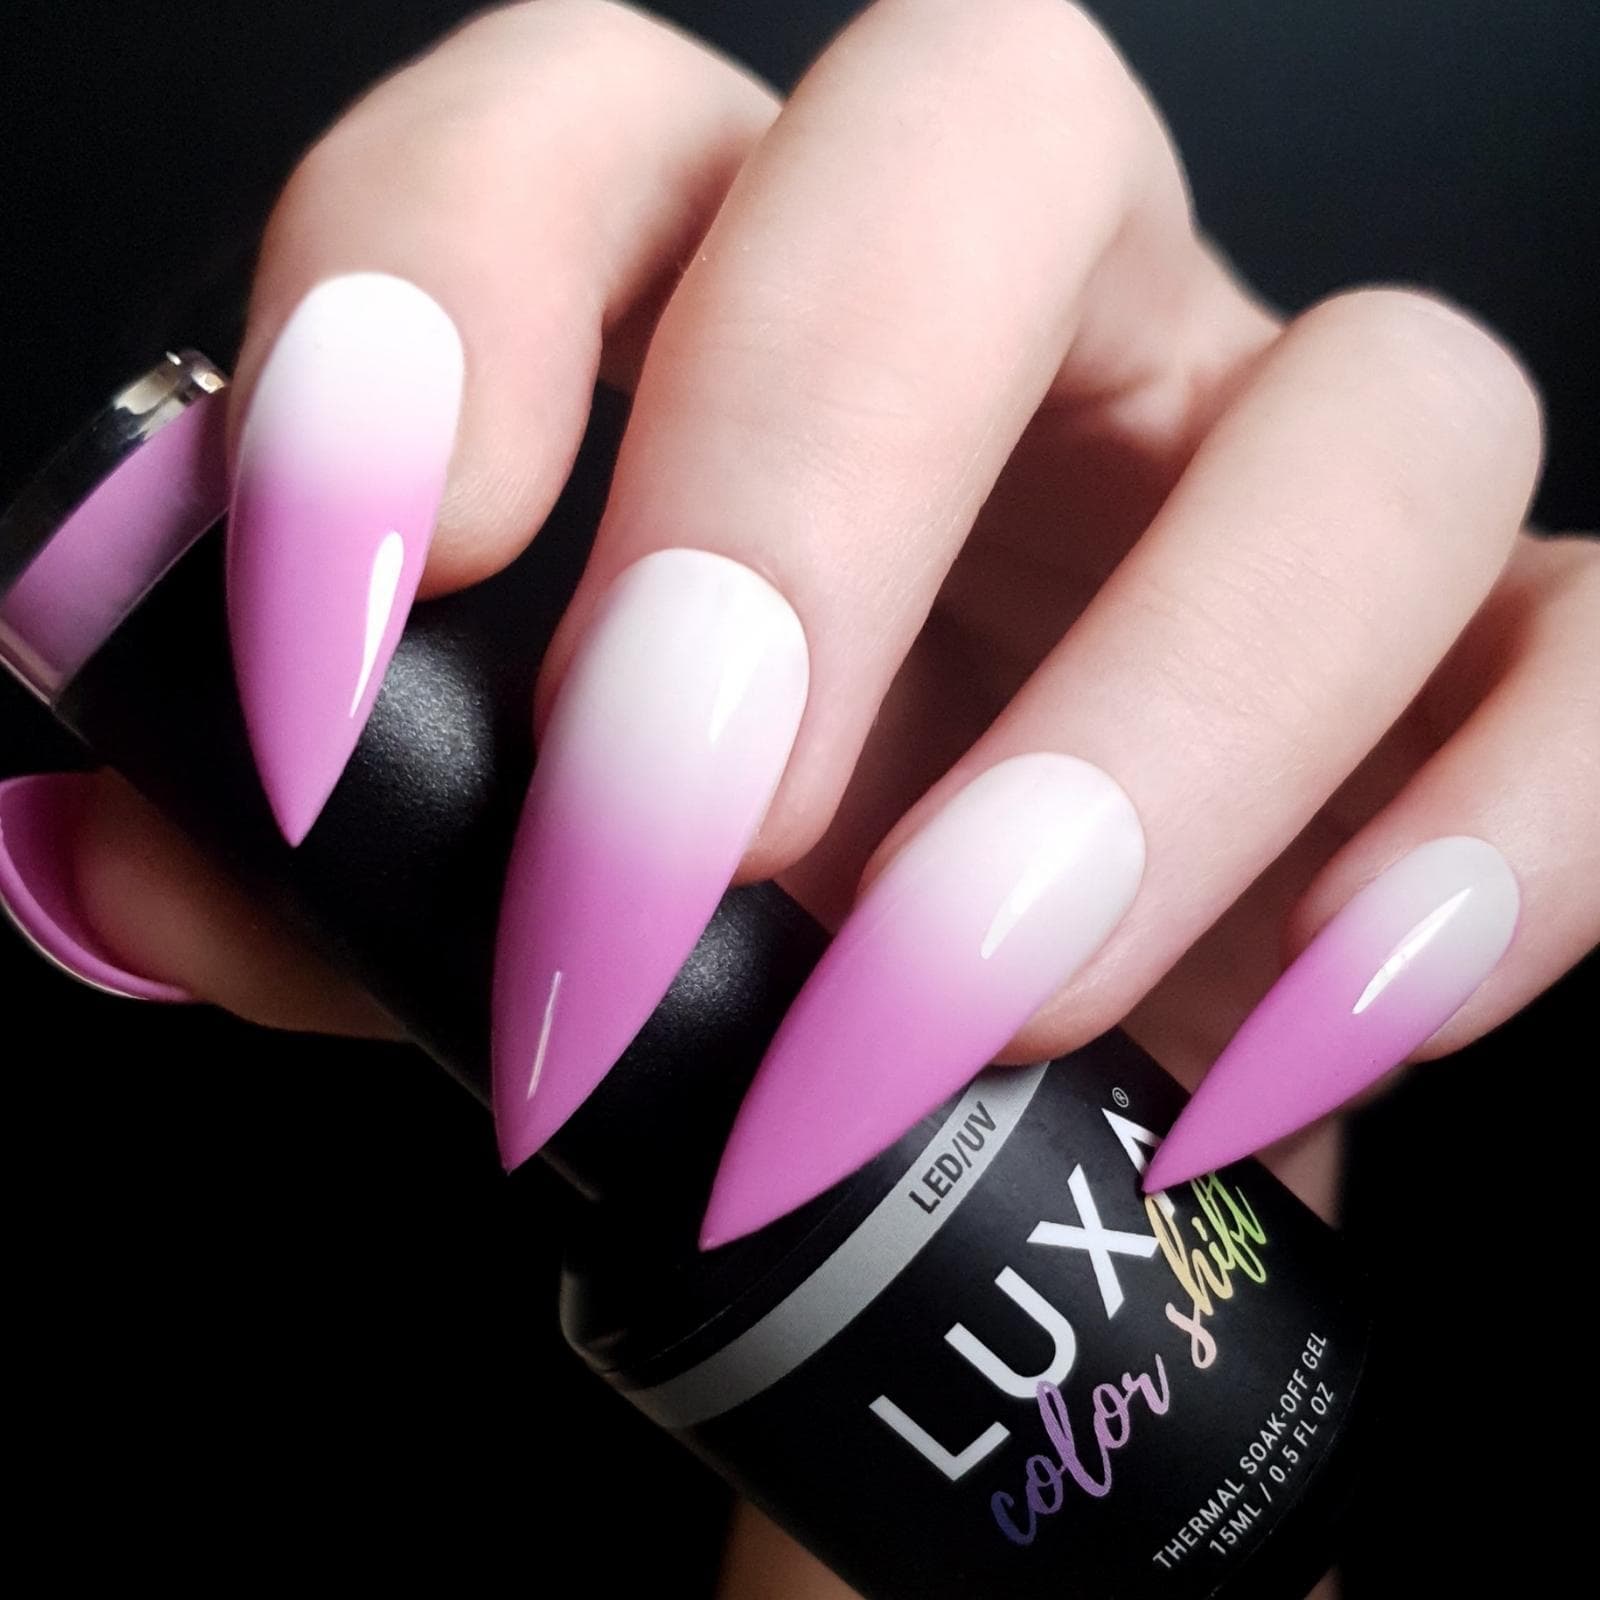 Luxapolish Floral Creme